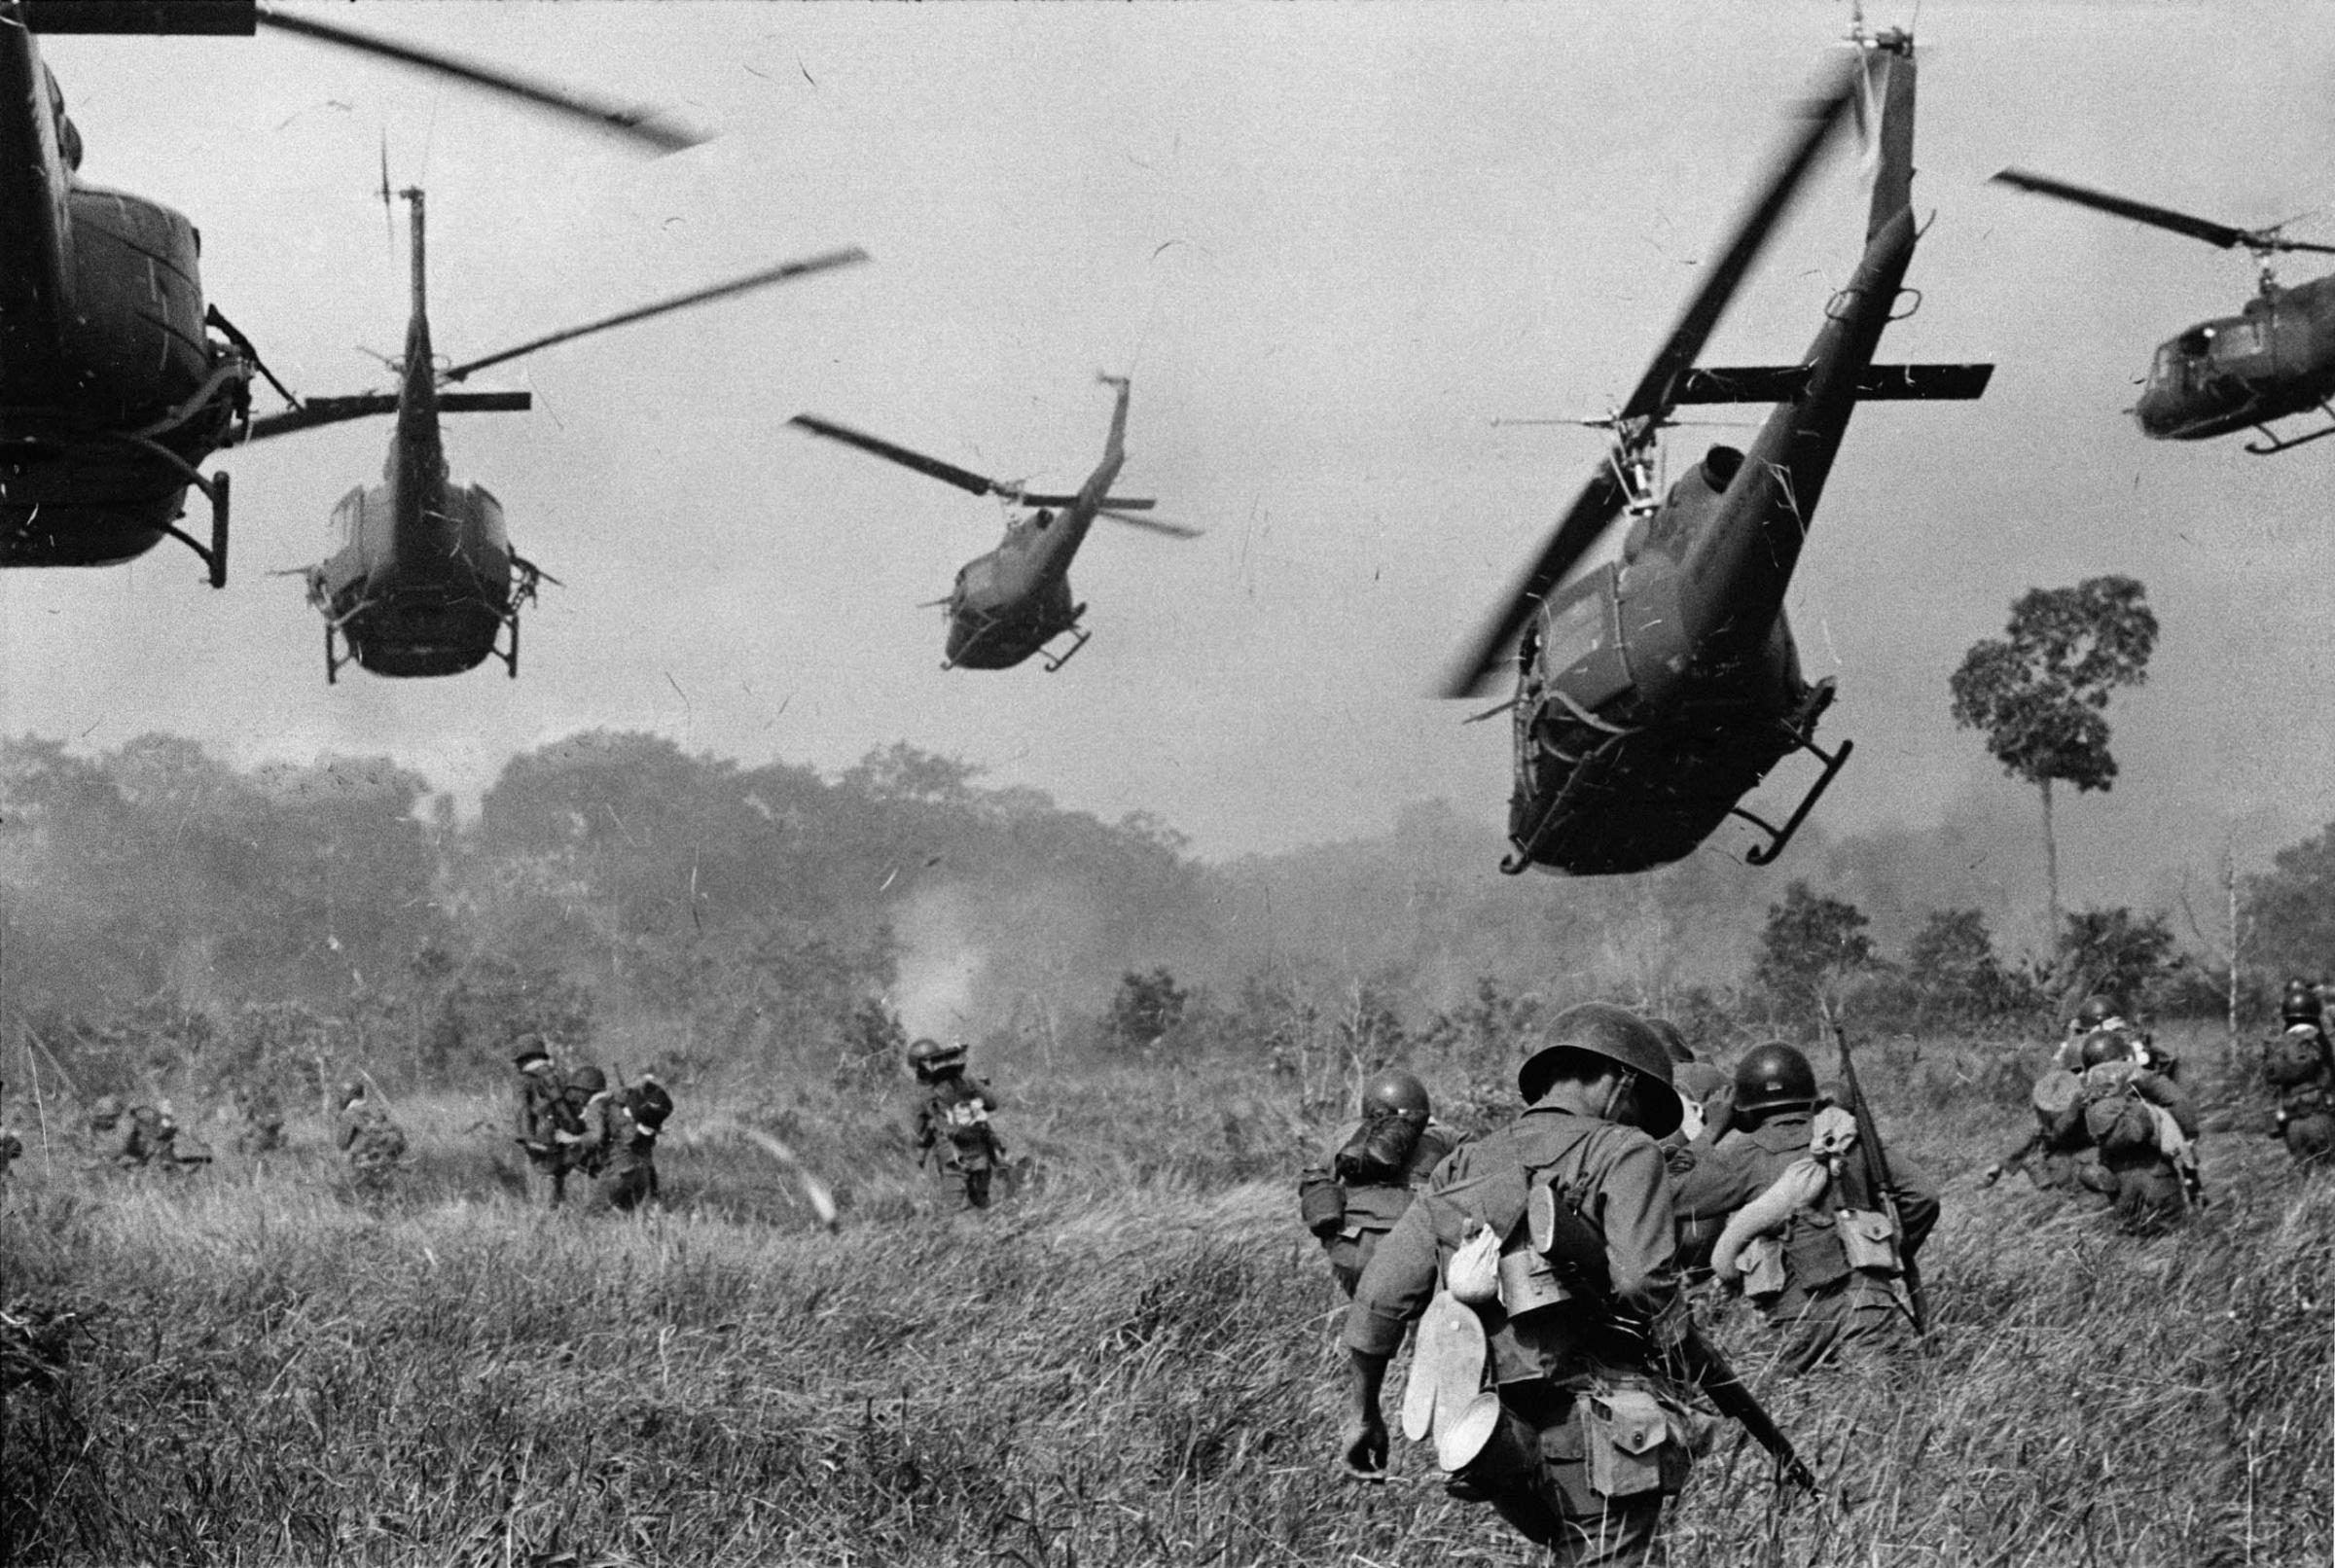 Hovering U.S. Army helicopters pour machine gun fire into the tree line to cover the advance of South Vietnamese ground troops in an attack on a Viet Cong camp 18 miles north of Tay Ninh, northwest of Saigon near the Cambodian border, in March 1965.